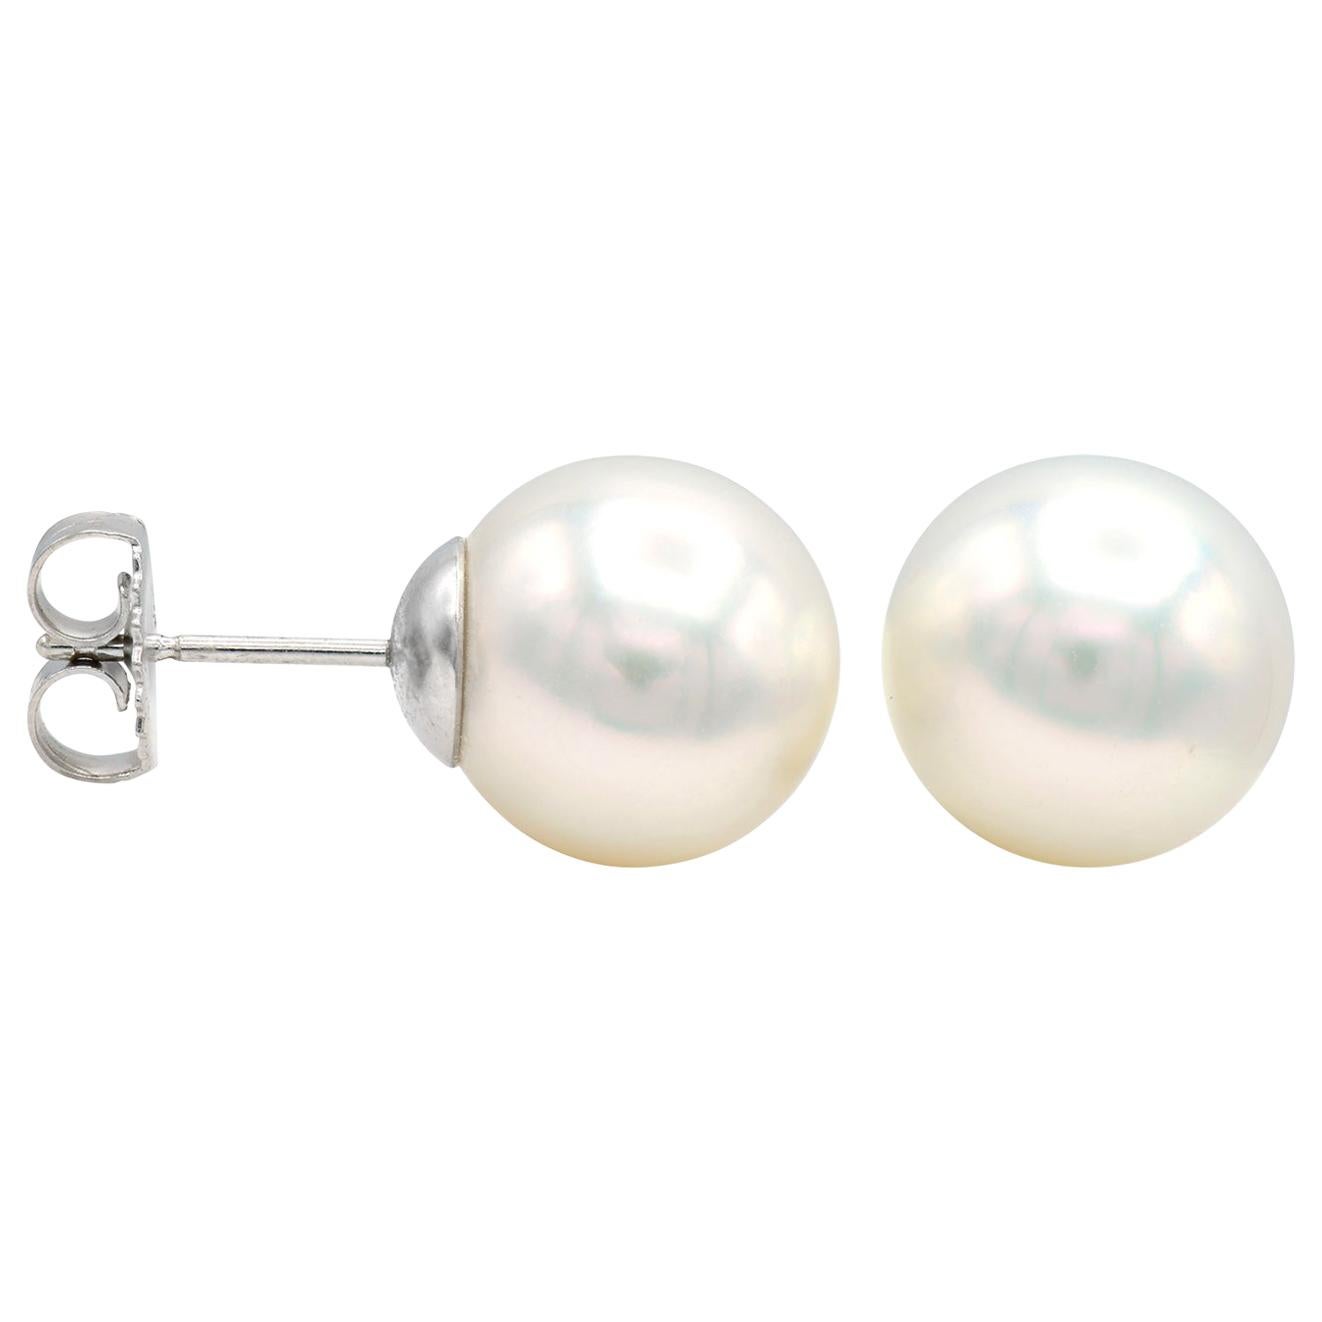 NEW HOT 10-11MM SOUTH SEA BLACK STUD PEARL EARRING 925 WHITE Silver 